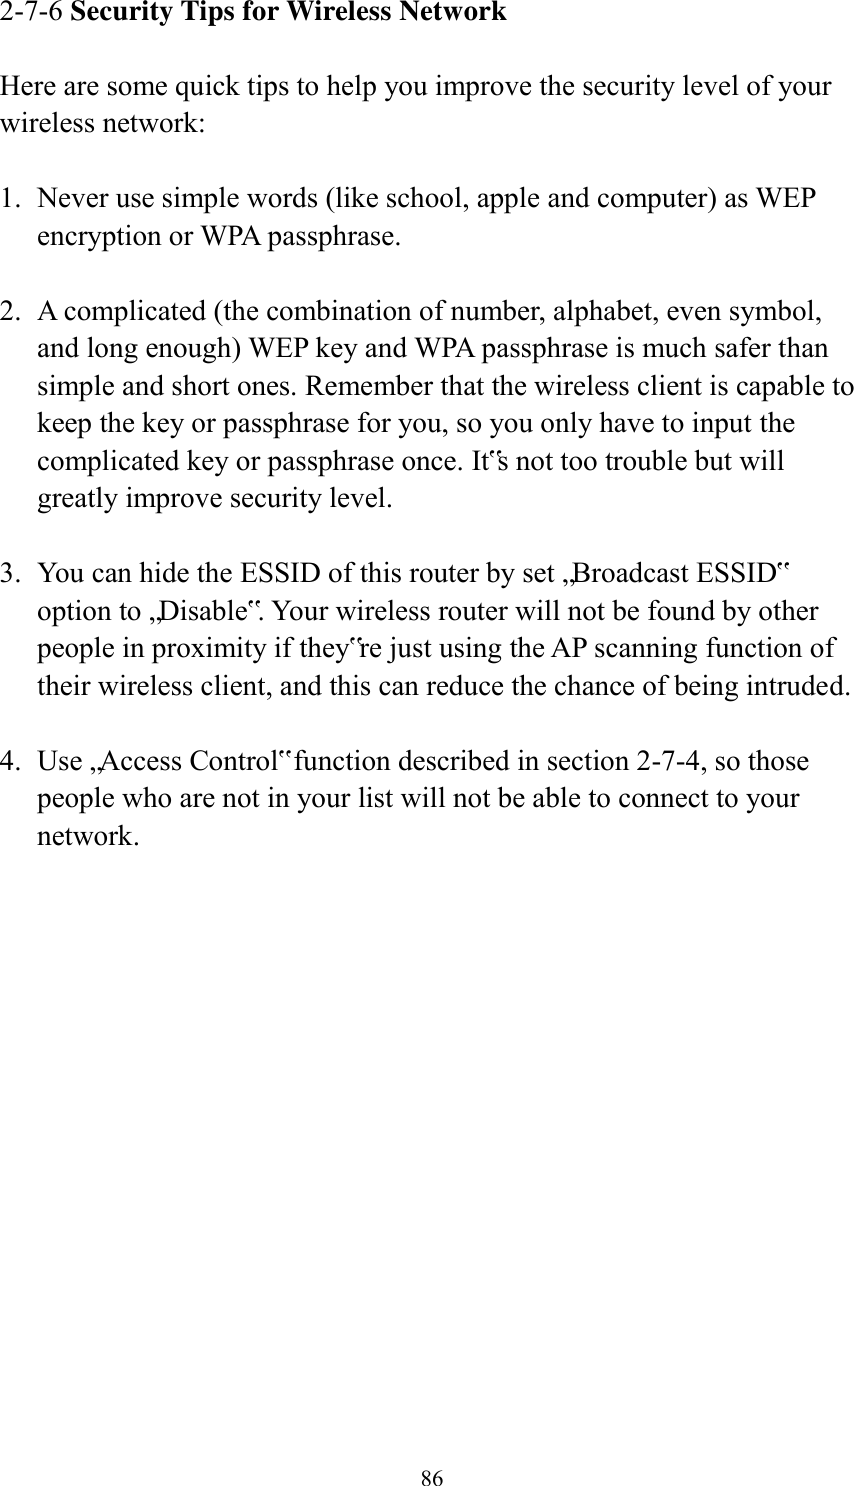  86 2-7-6 Security Tips for Wireless Network  Here are some quick tips to help you improve the security level of your wireless network:  1. Never use simple words (like school, apple and computer) as WEP encryption or WPA passphrase.  2. A complicated (the combination of number, alphabet, even symbol, and long enough) WEP key and WPA passphrase is much safer than simple and short ones. Remember that the wireless client is capable to keep the key or passphrase for you, so you only have to input the complicated key or passphrase once. It‟s not too trouble but will greatly improve security level.  3. You can hide the ESSID of this router by set „Broadcast ESSID‟ option to „Disable‟. Your wireless router will not be found by other people in proximity if they‟re just using the AP scanning function of their wireless client, and this can reduce the chance of being intruded.  4. Use „Access Control‟ function described in section 2-7-4, so those people who are not in your list will not be able to connect to your network. 